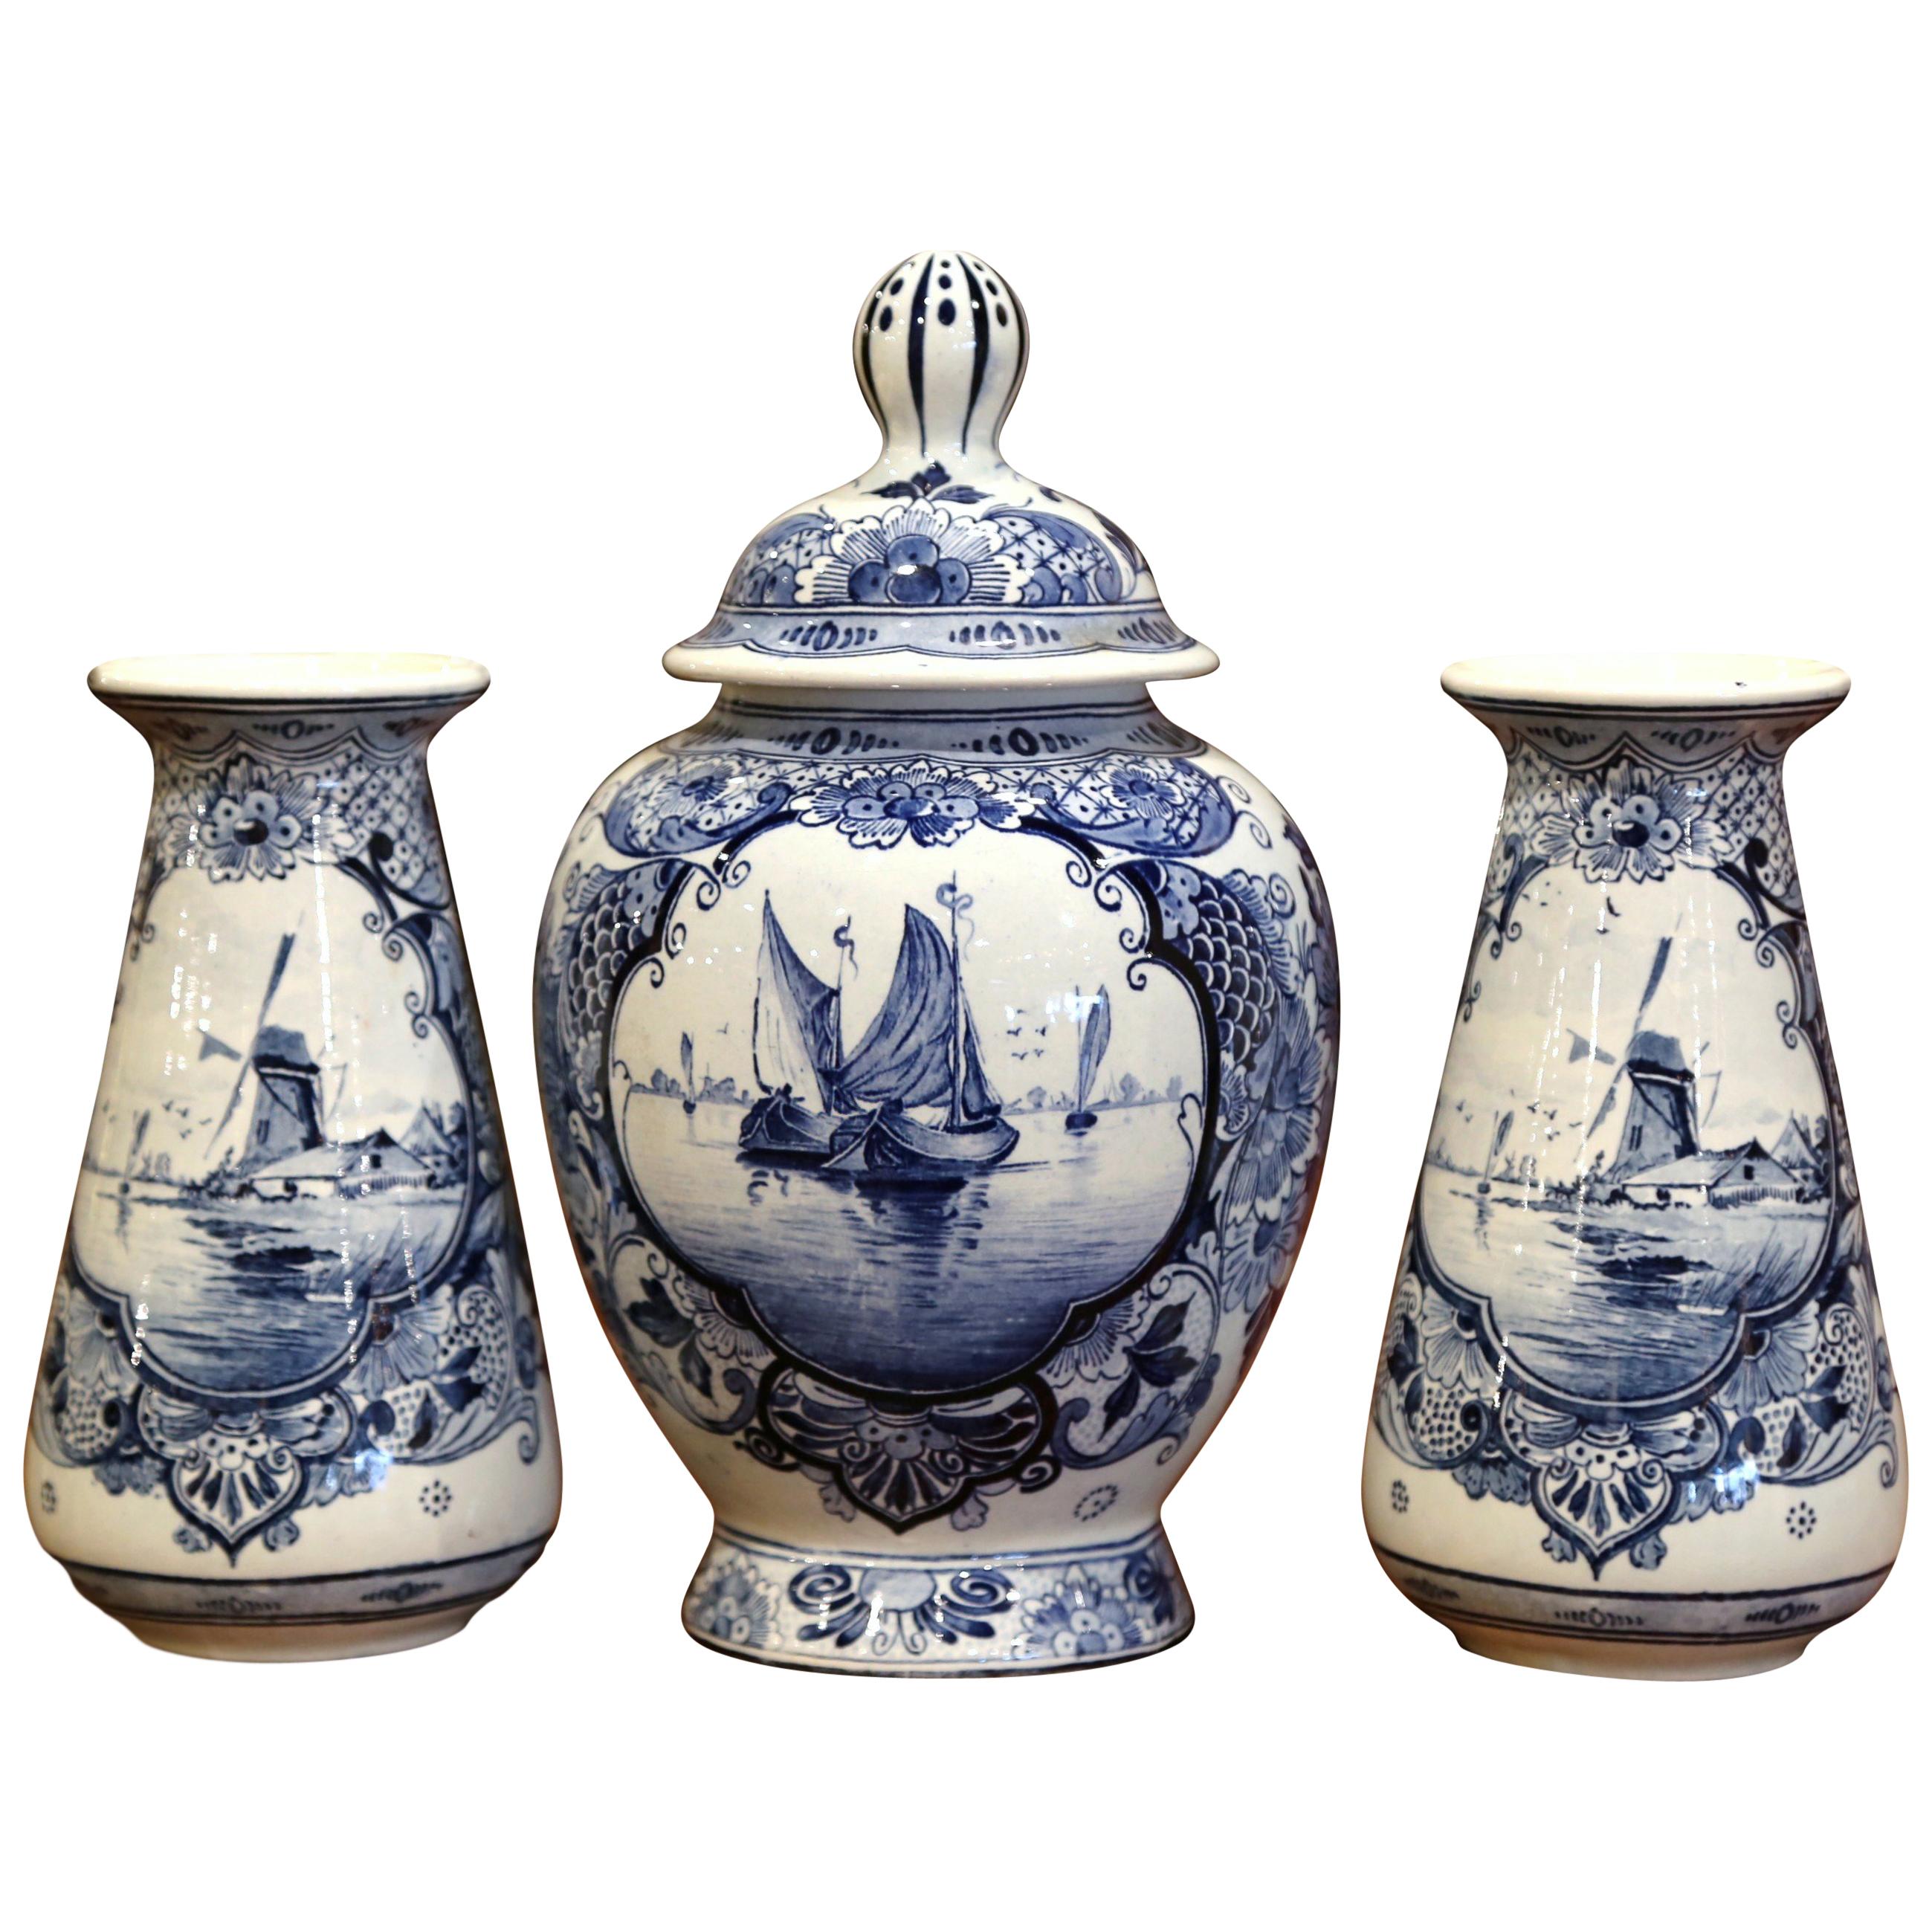 Early 20th Century Dutch Blue and White Maastricht Delft Mantel Three-Piece Set